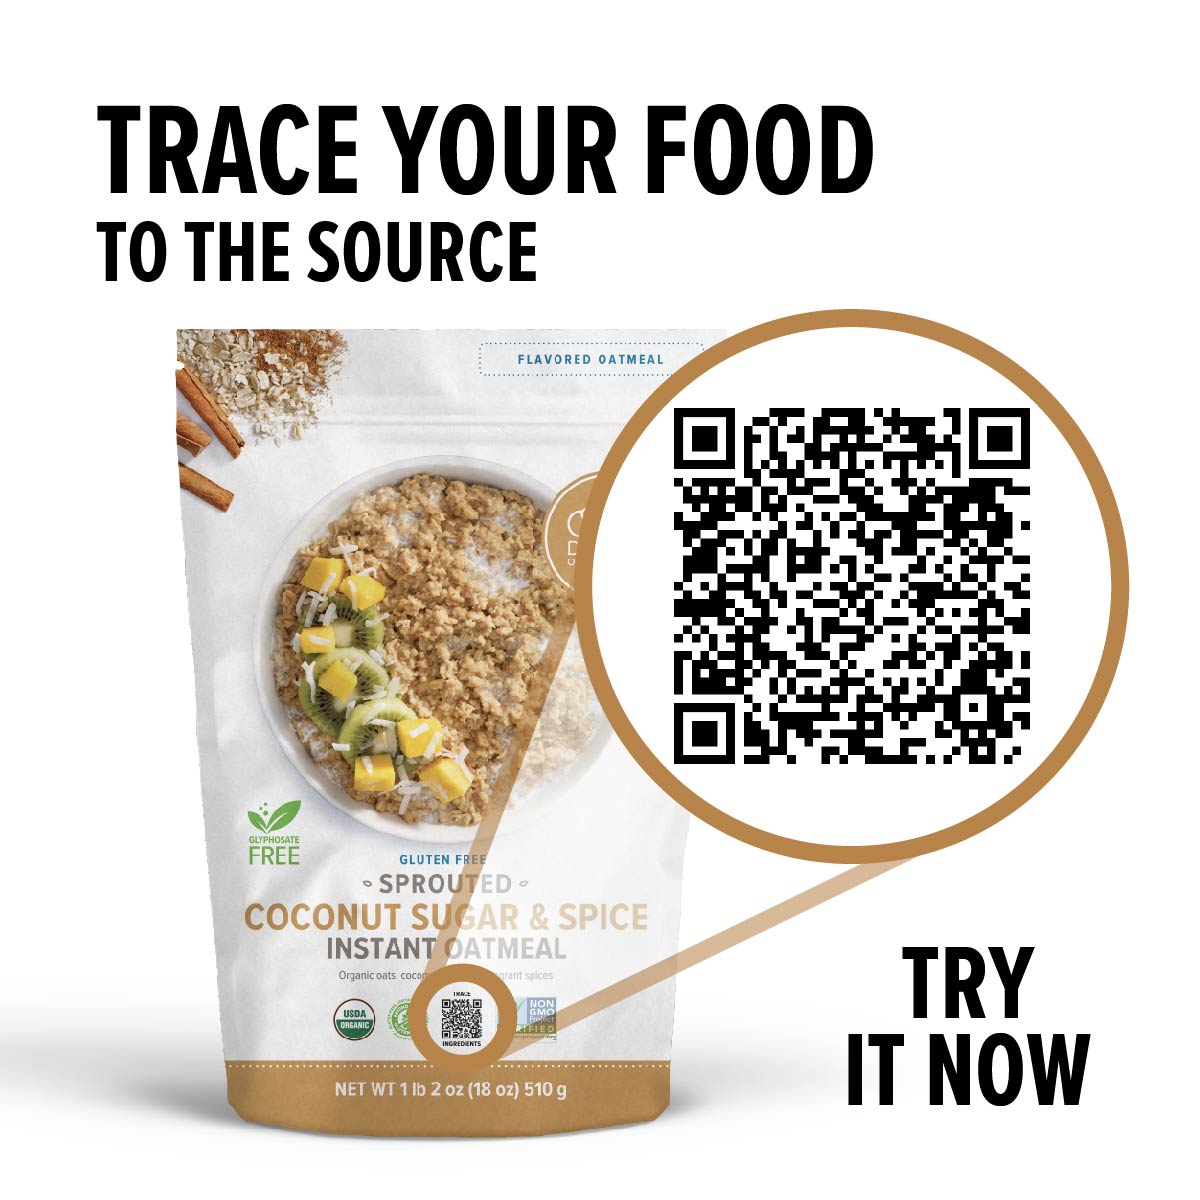 Sprouted Coconut Sugar & Spice Organic Instant Oatmeal